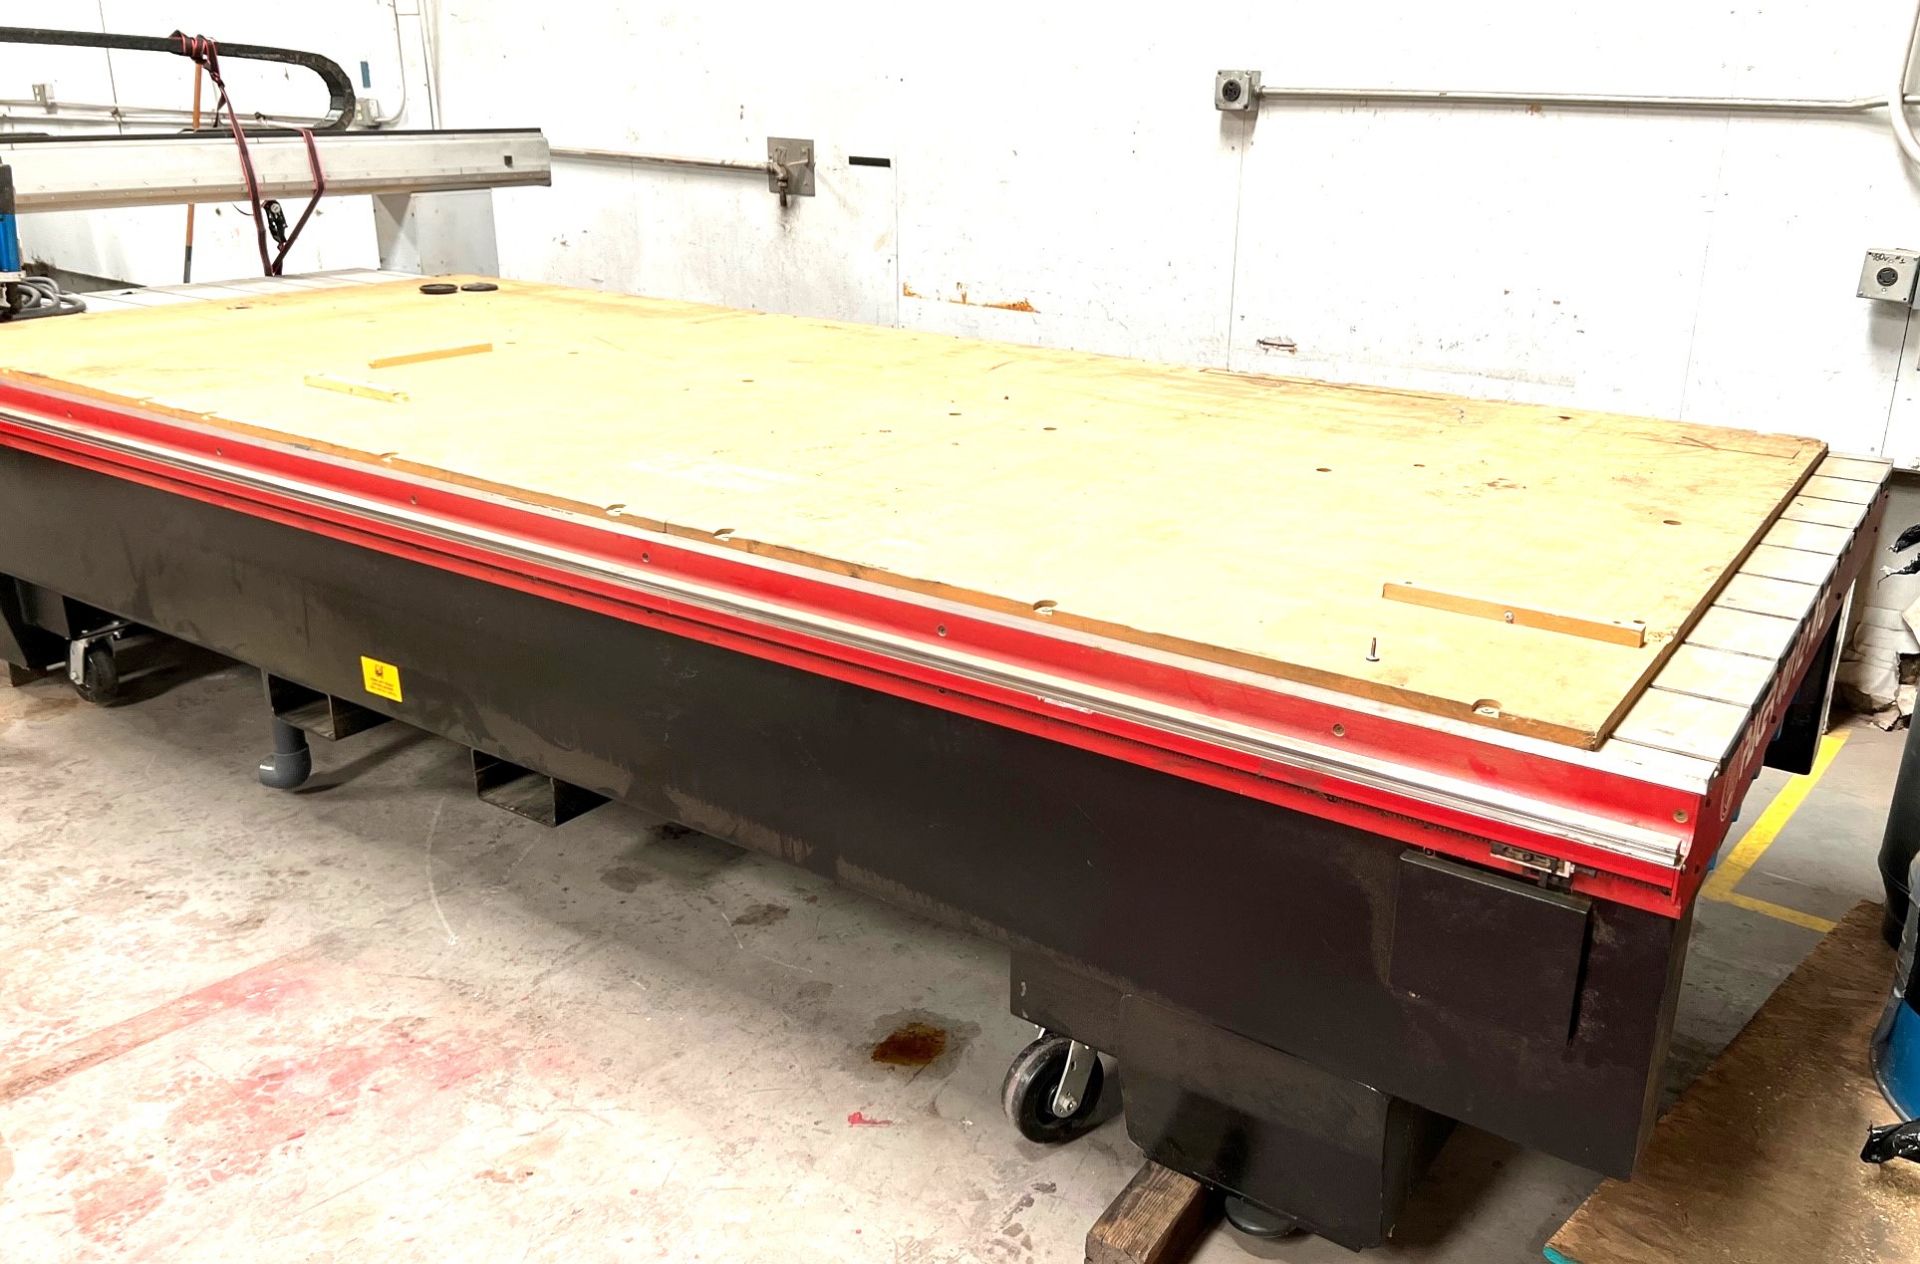 5'X12' AXYZ PACER 4012 ATC CNC ROUTER, S/N 5390-5280, NEW 2015 - Image 6 of 14